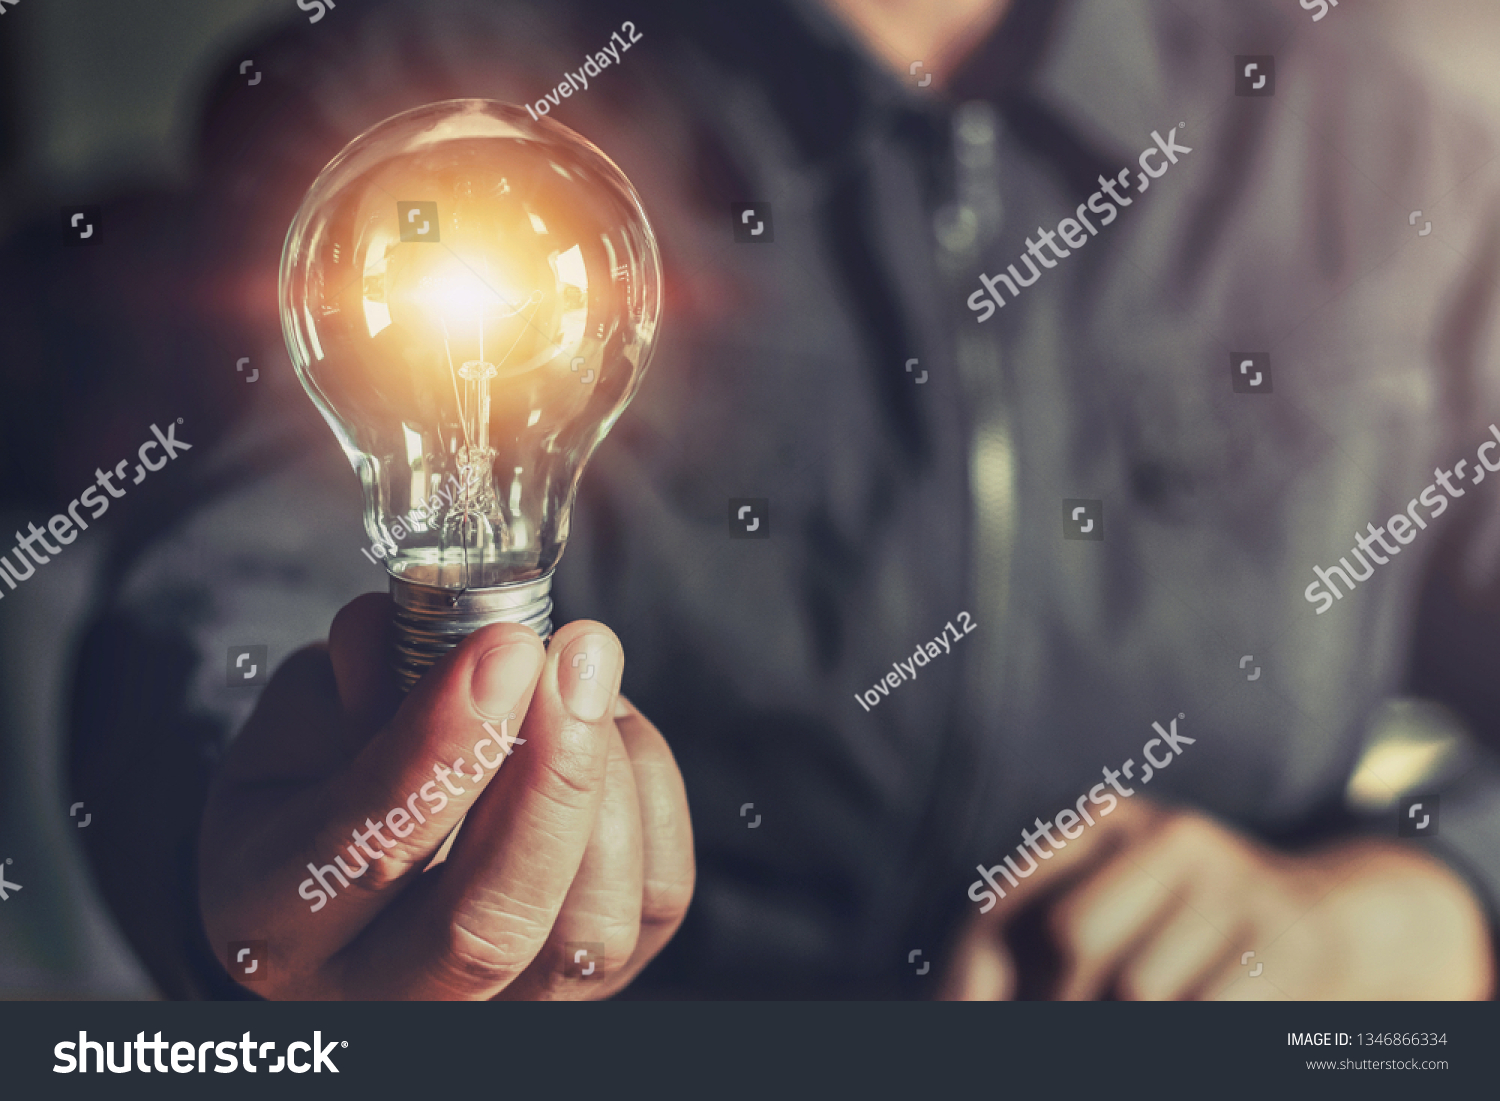  hand holding light bulb. idea concept with innovation and inspiration #1346866334